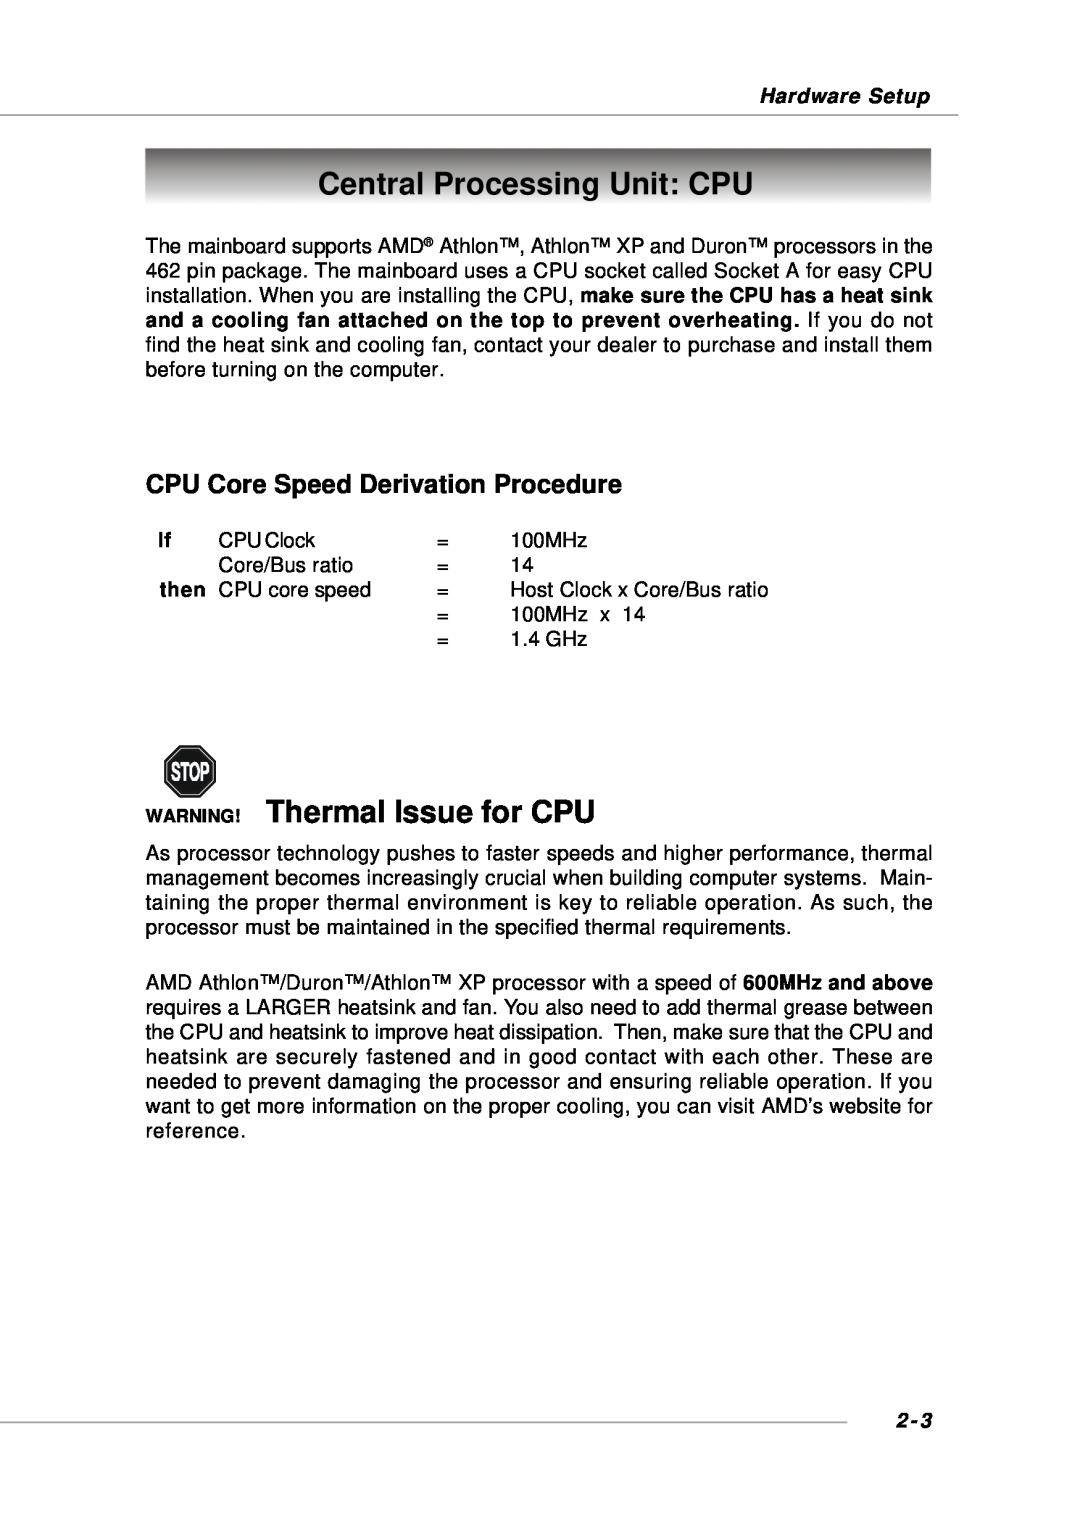 Intel KM4AM, KM4M Central Processing Unit CPU, WARNING! Thermal Issue for CPU, CPU Core Speed Derivation Procedure, then 